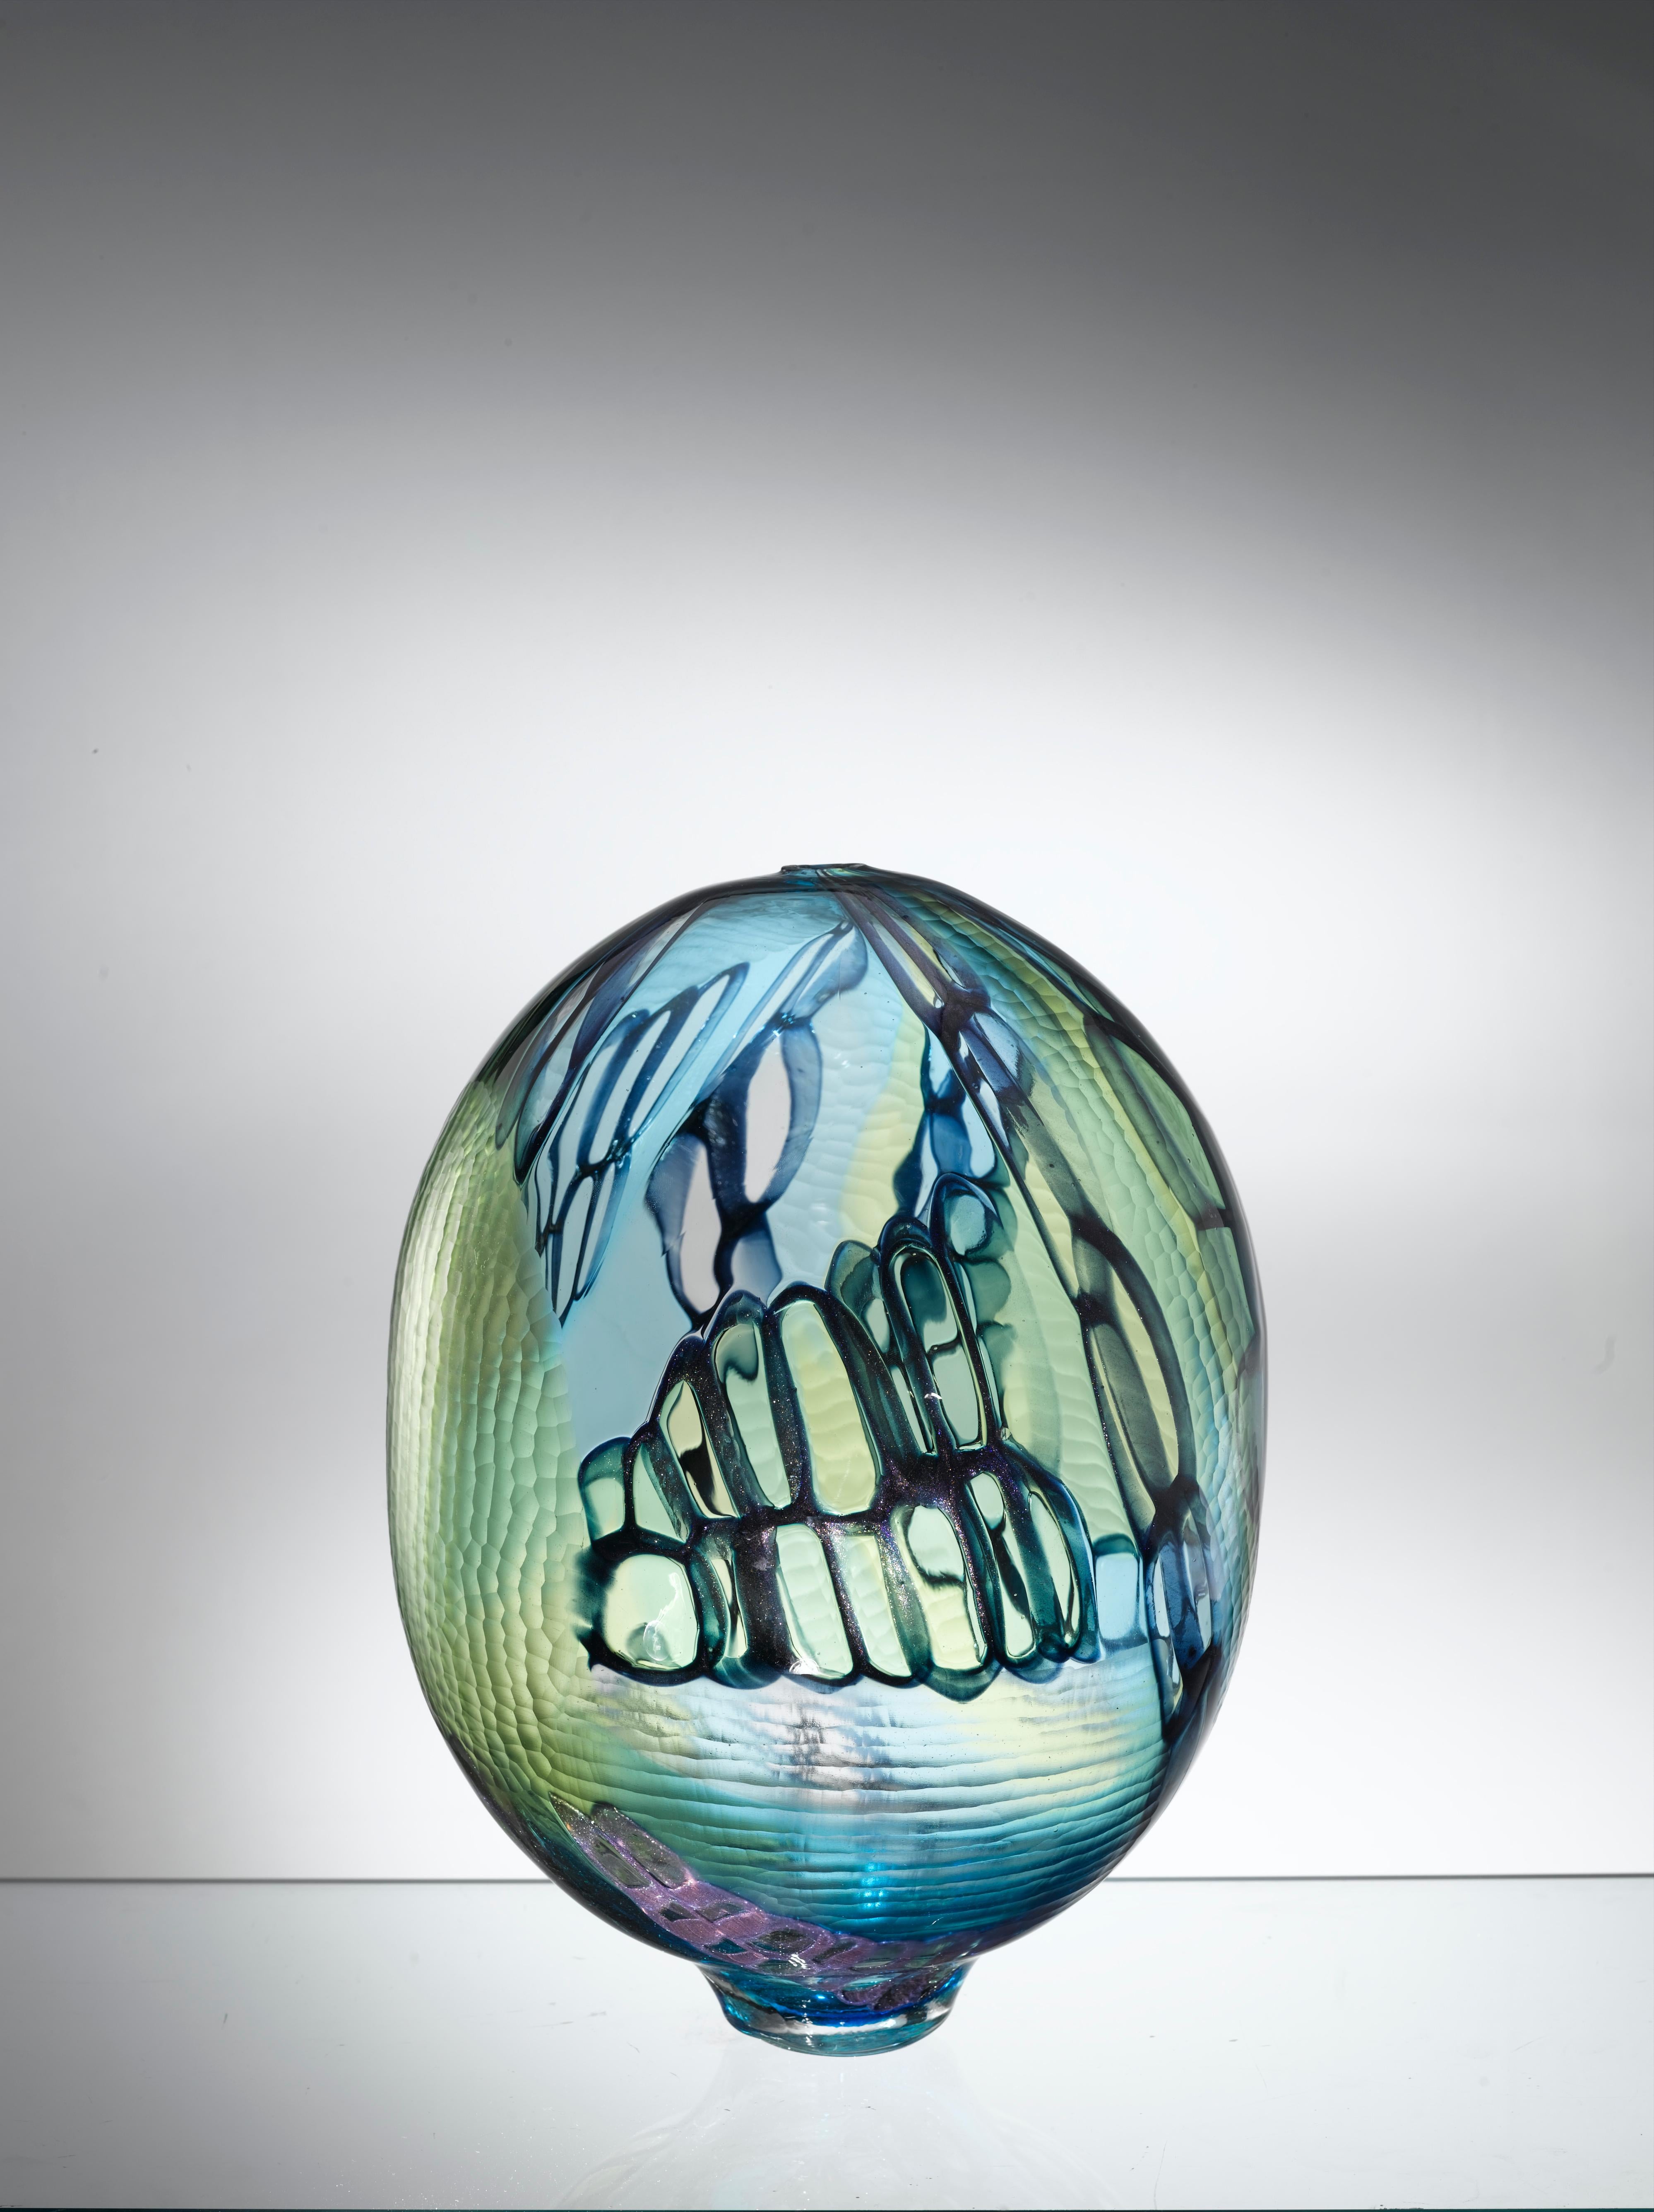 Murano artistic glass. The Murano artistic glass sculpture is a creative and natural expression of the artist Eros Raffael, made of Murano blown glass by Eros Raffael, in this sculpture they are enclosed in perfect regular shapes: the harmony, and